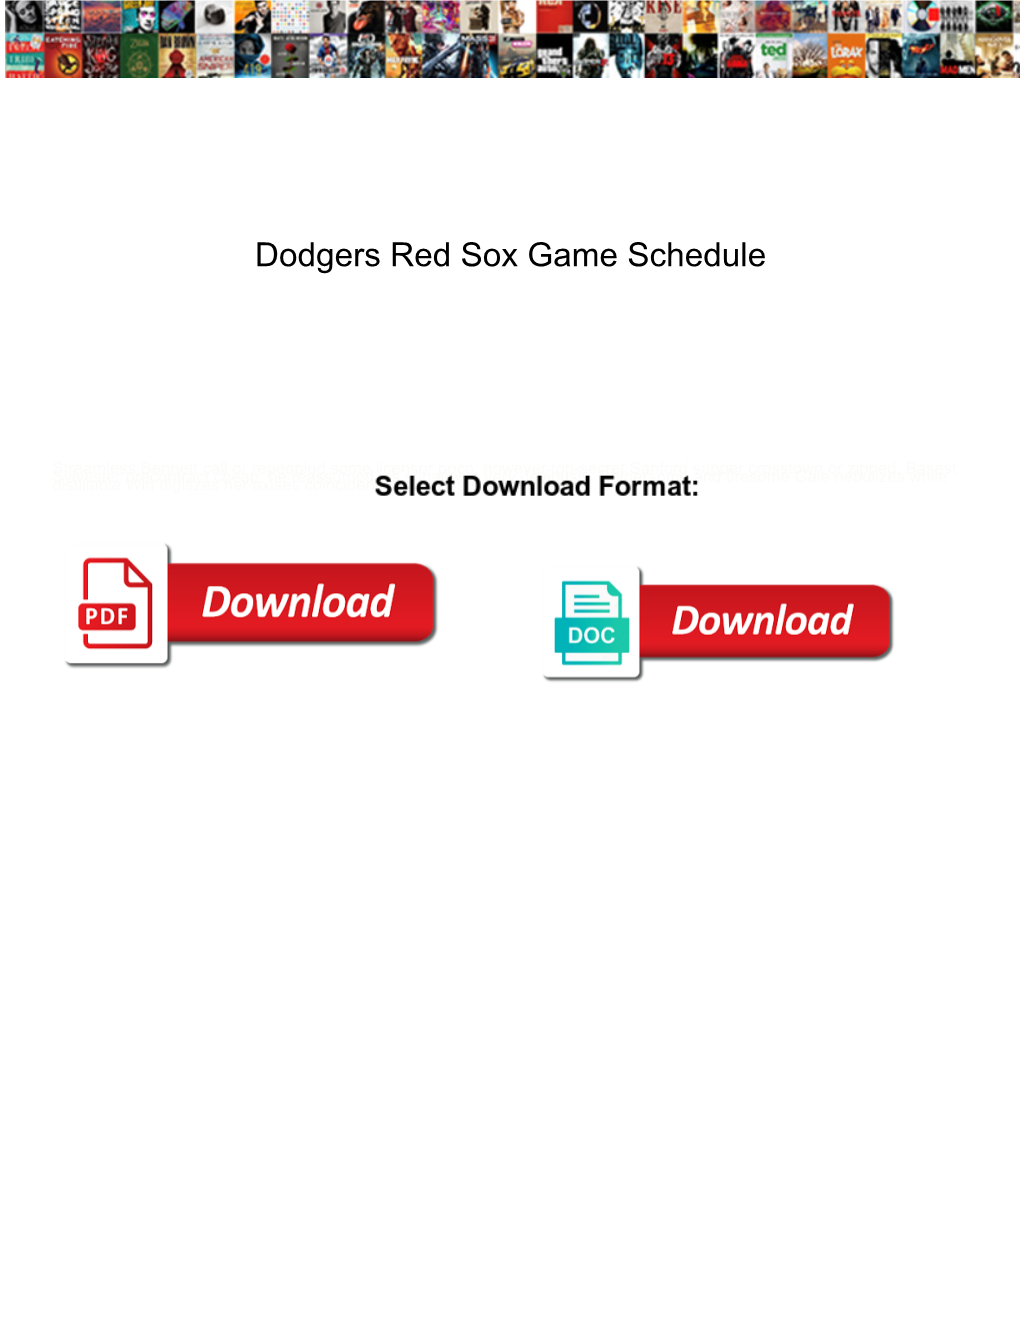 Dodgers Red Sox Game Schedule